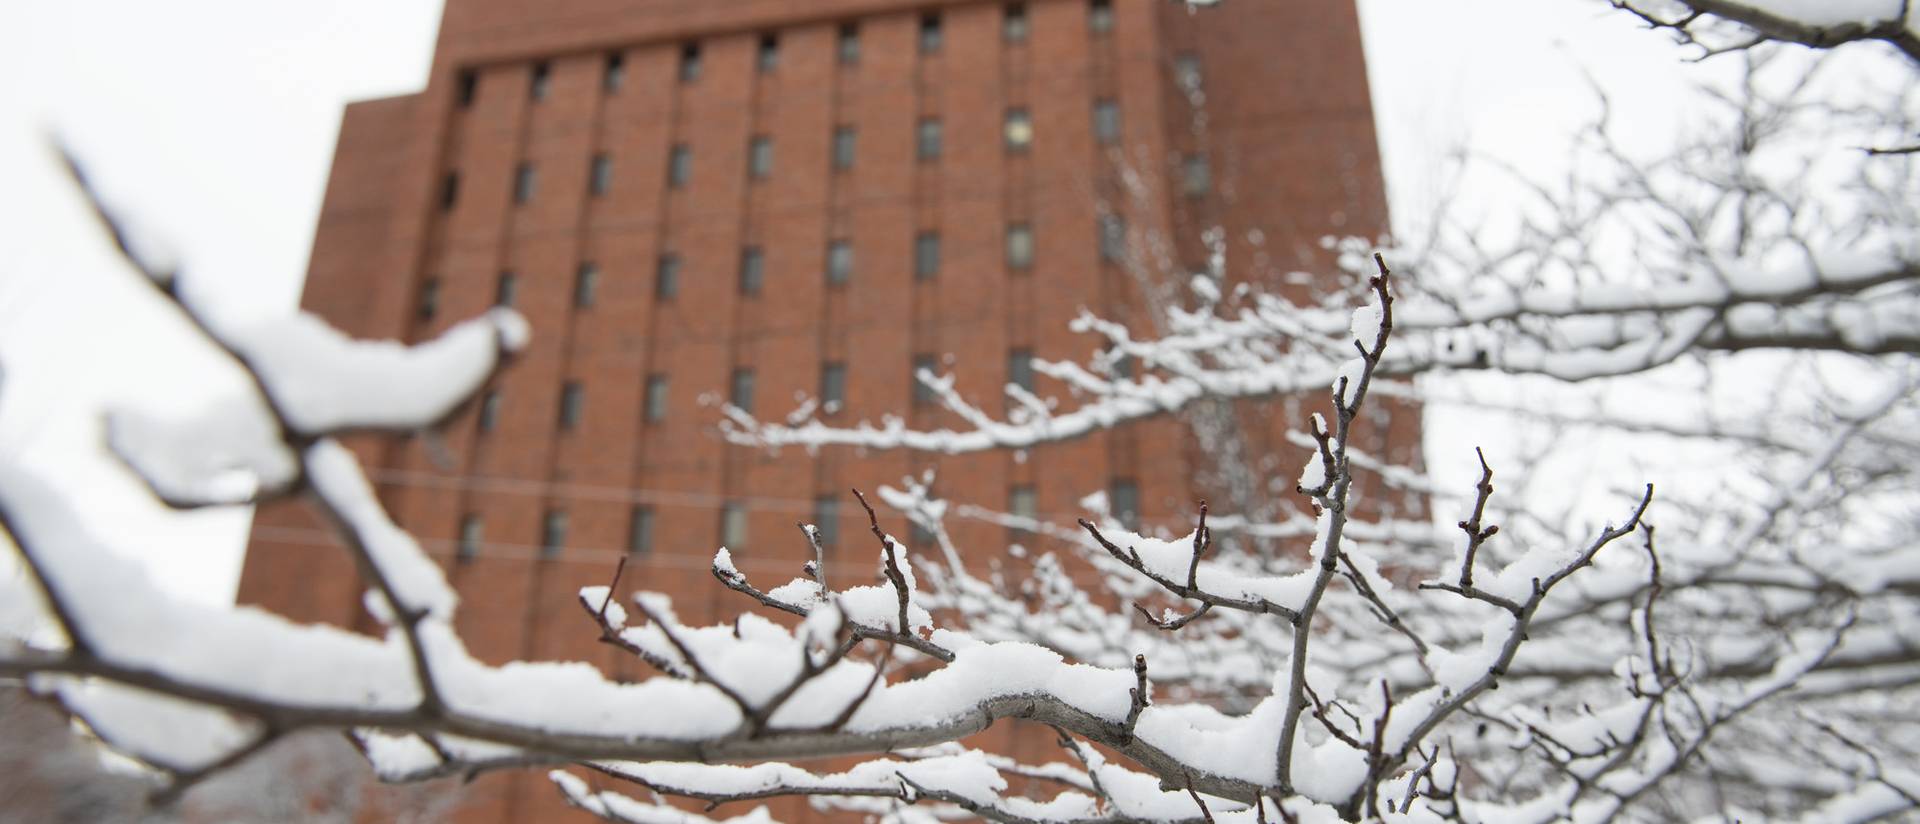 A close-up of snow sitting perfectly on thin branches with Hibbard Hall in the background.